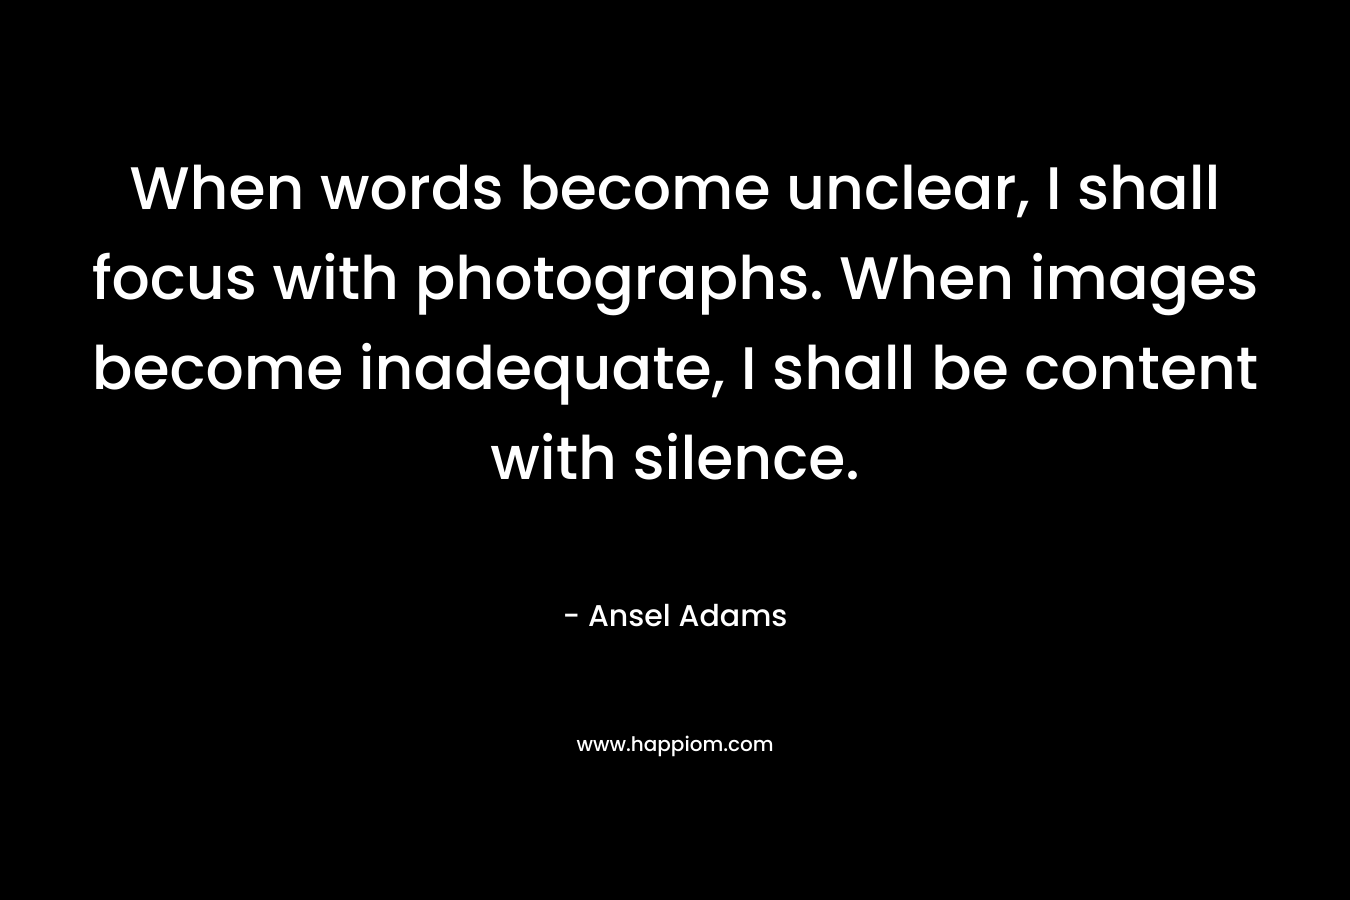 When words become unclear, I shall focus with photographs. When images become inadequate, I shall be content with silence.